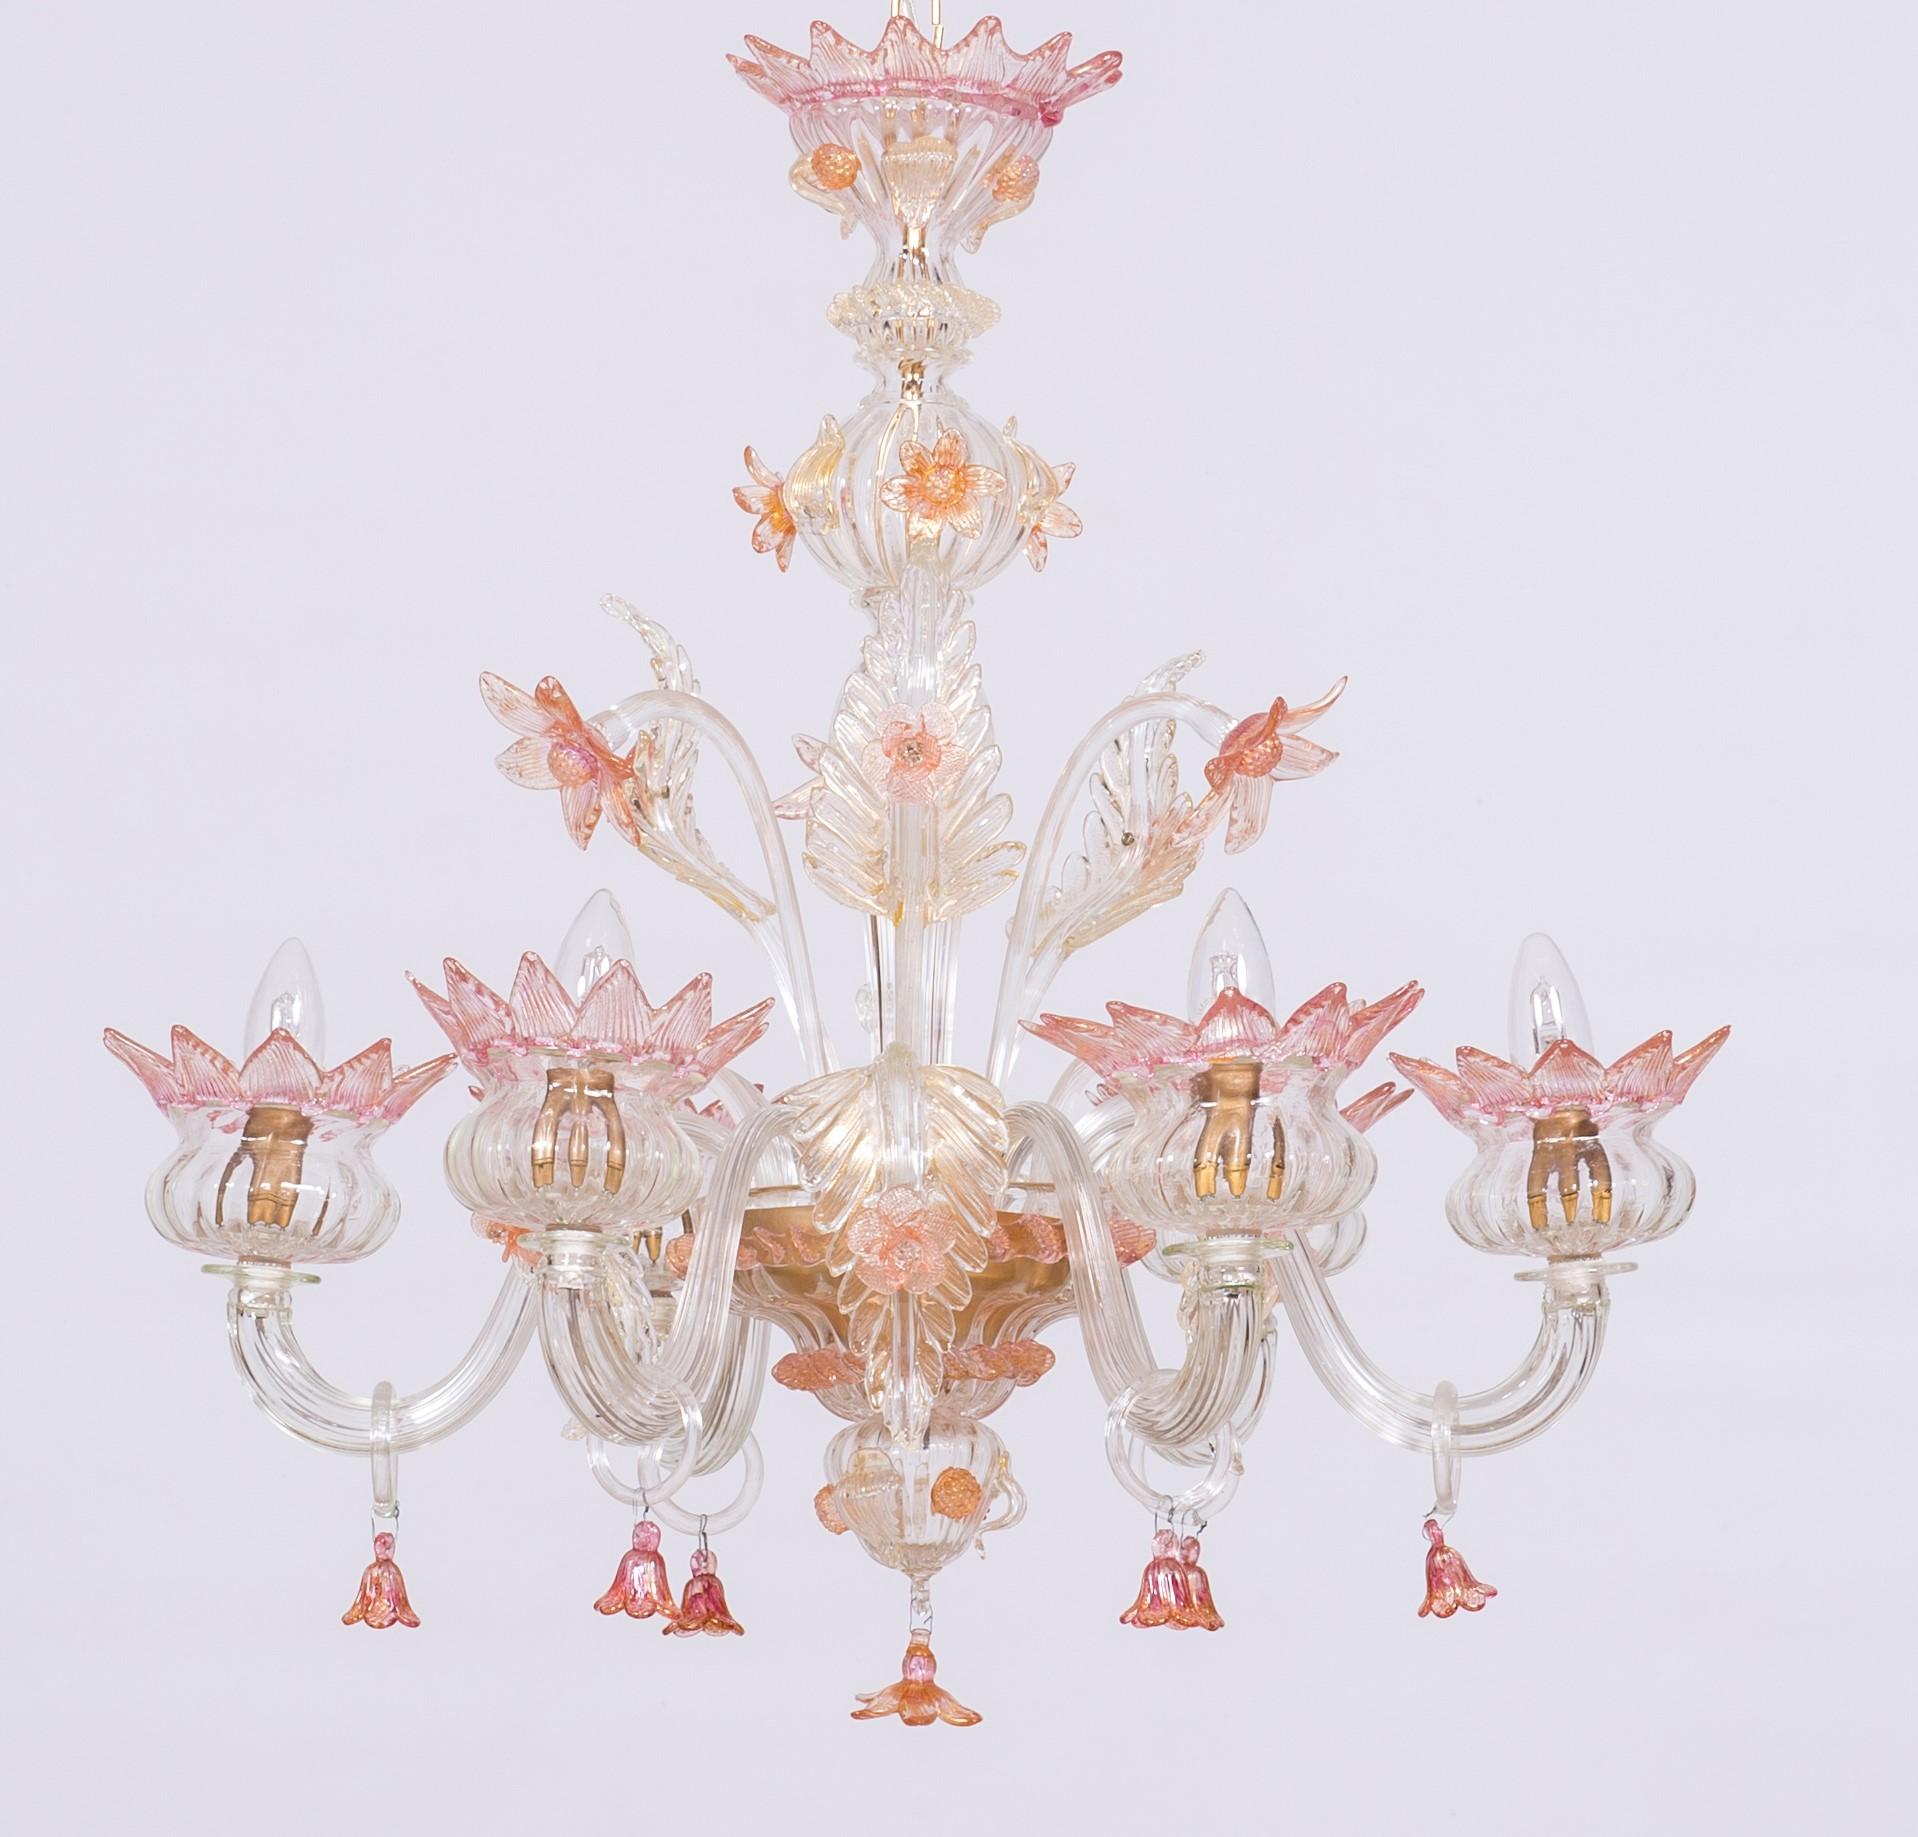 Elegant Contemporary Floral Murano Glass Chandelier Pink and Gold Vintage Murano Gallery, Italy.
This fine chandelier, handcrafted in the Island of Murano (Italy Venice area), stands out for its colorful floral decorations that are enhanced by a